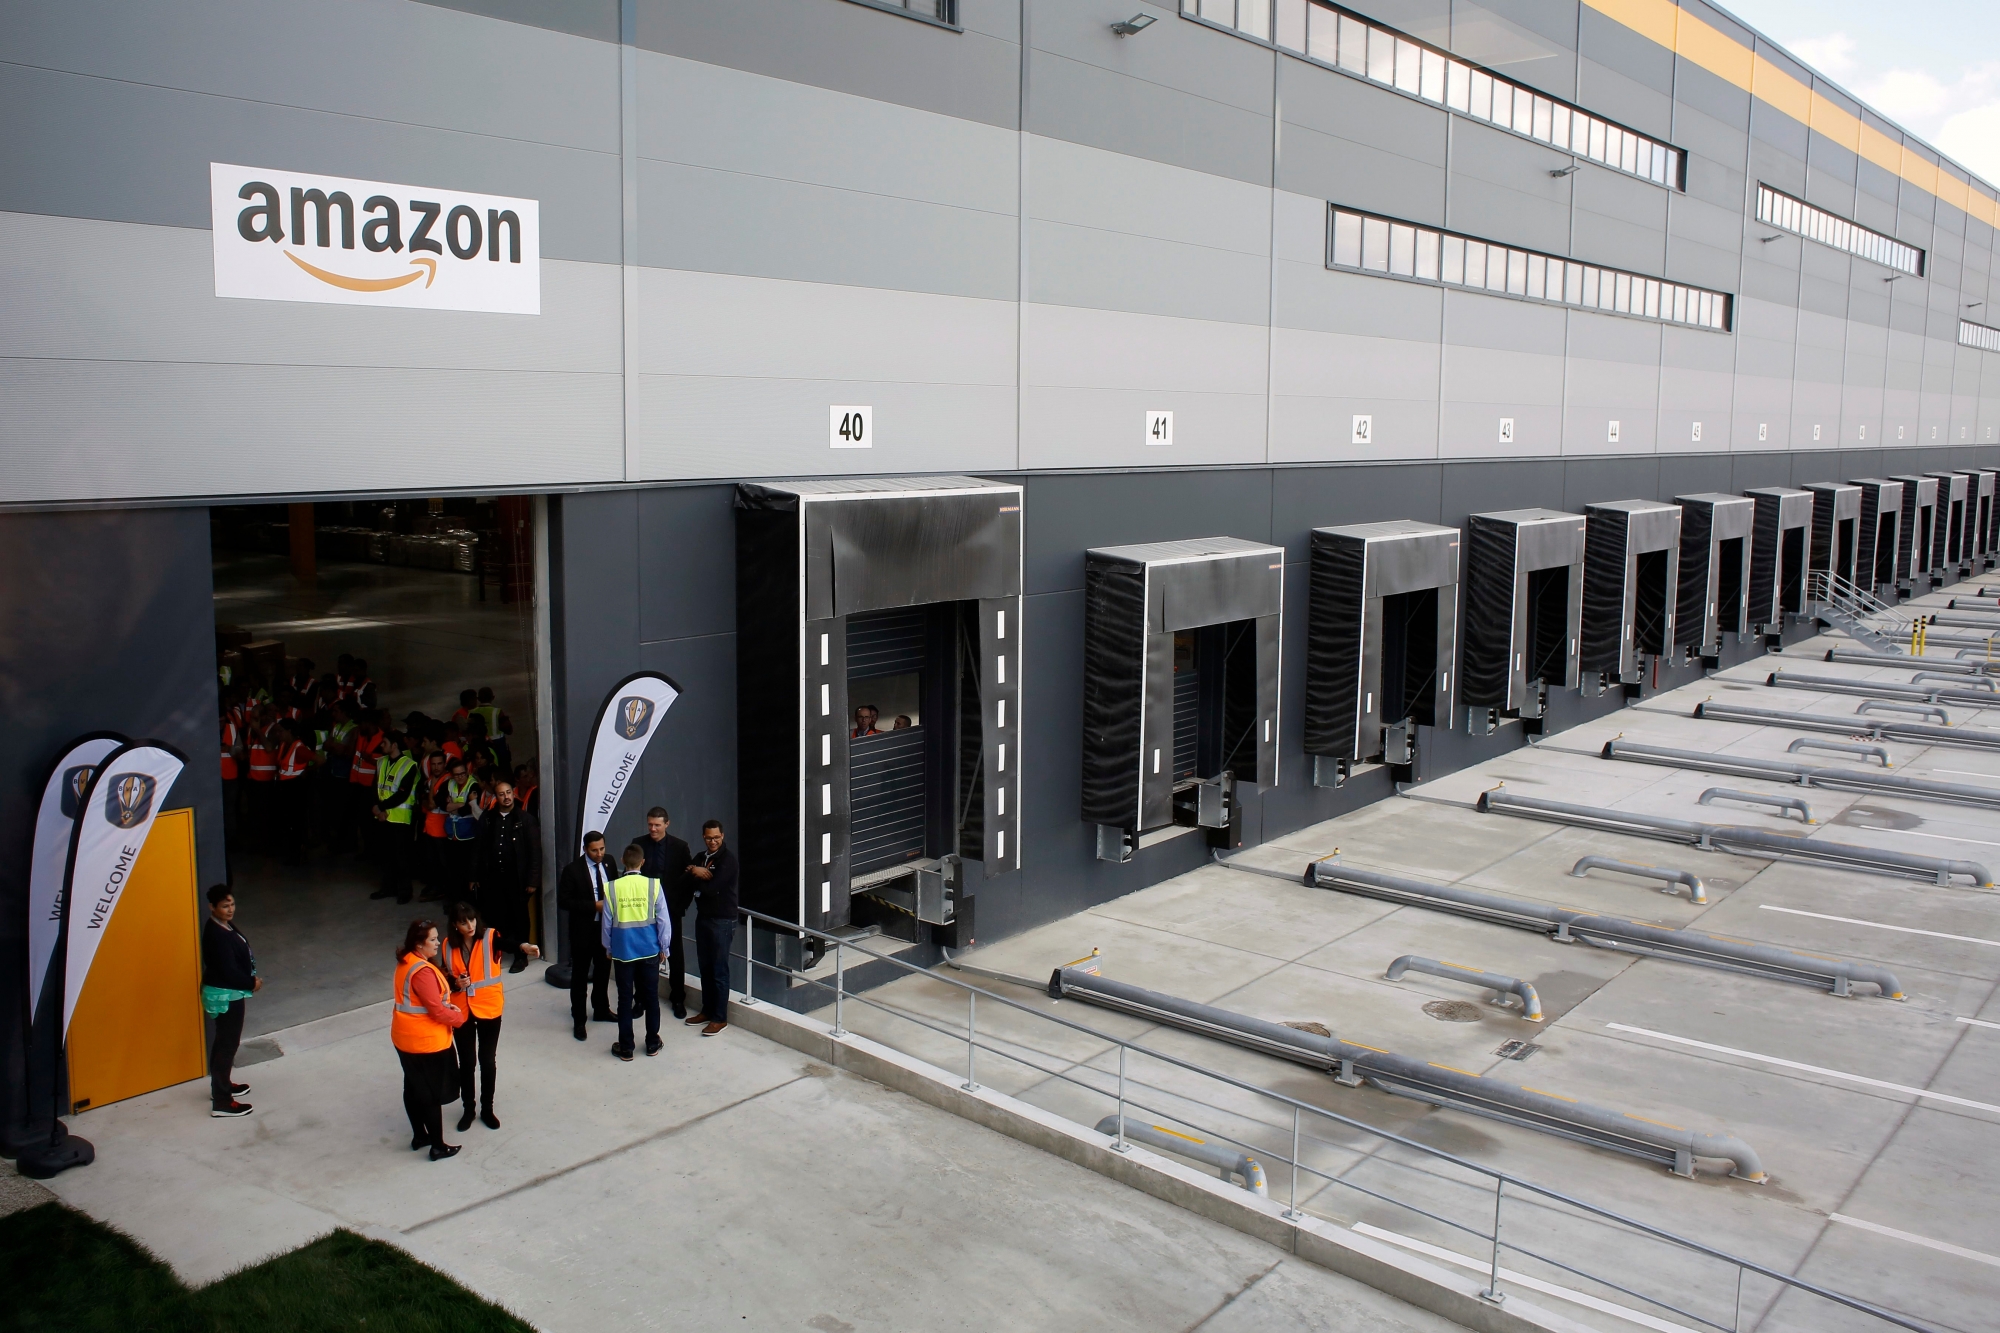 Employees wait for France's President Emmanuel Macron at new Amazon facility, in Longueau, northern France, Tuesday, Oct. 3, 2017. (AP Photo/Thibault Camus) France Macron Jobs